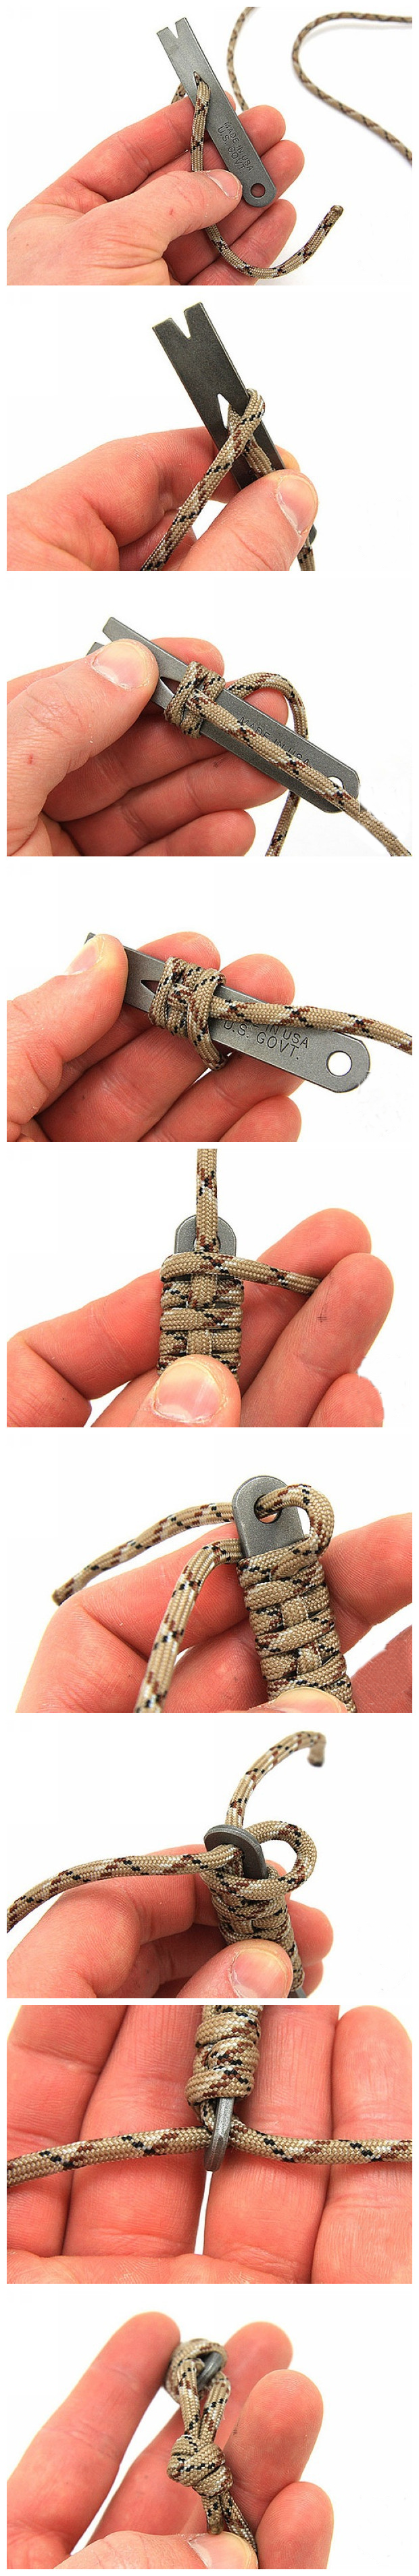 Stainless-Steel-Crowbar-Crank-shaped-Blade-Wire-Winder-Nail-Puller-Keychain-With-Rope-1053573